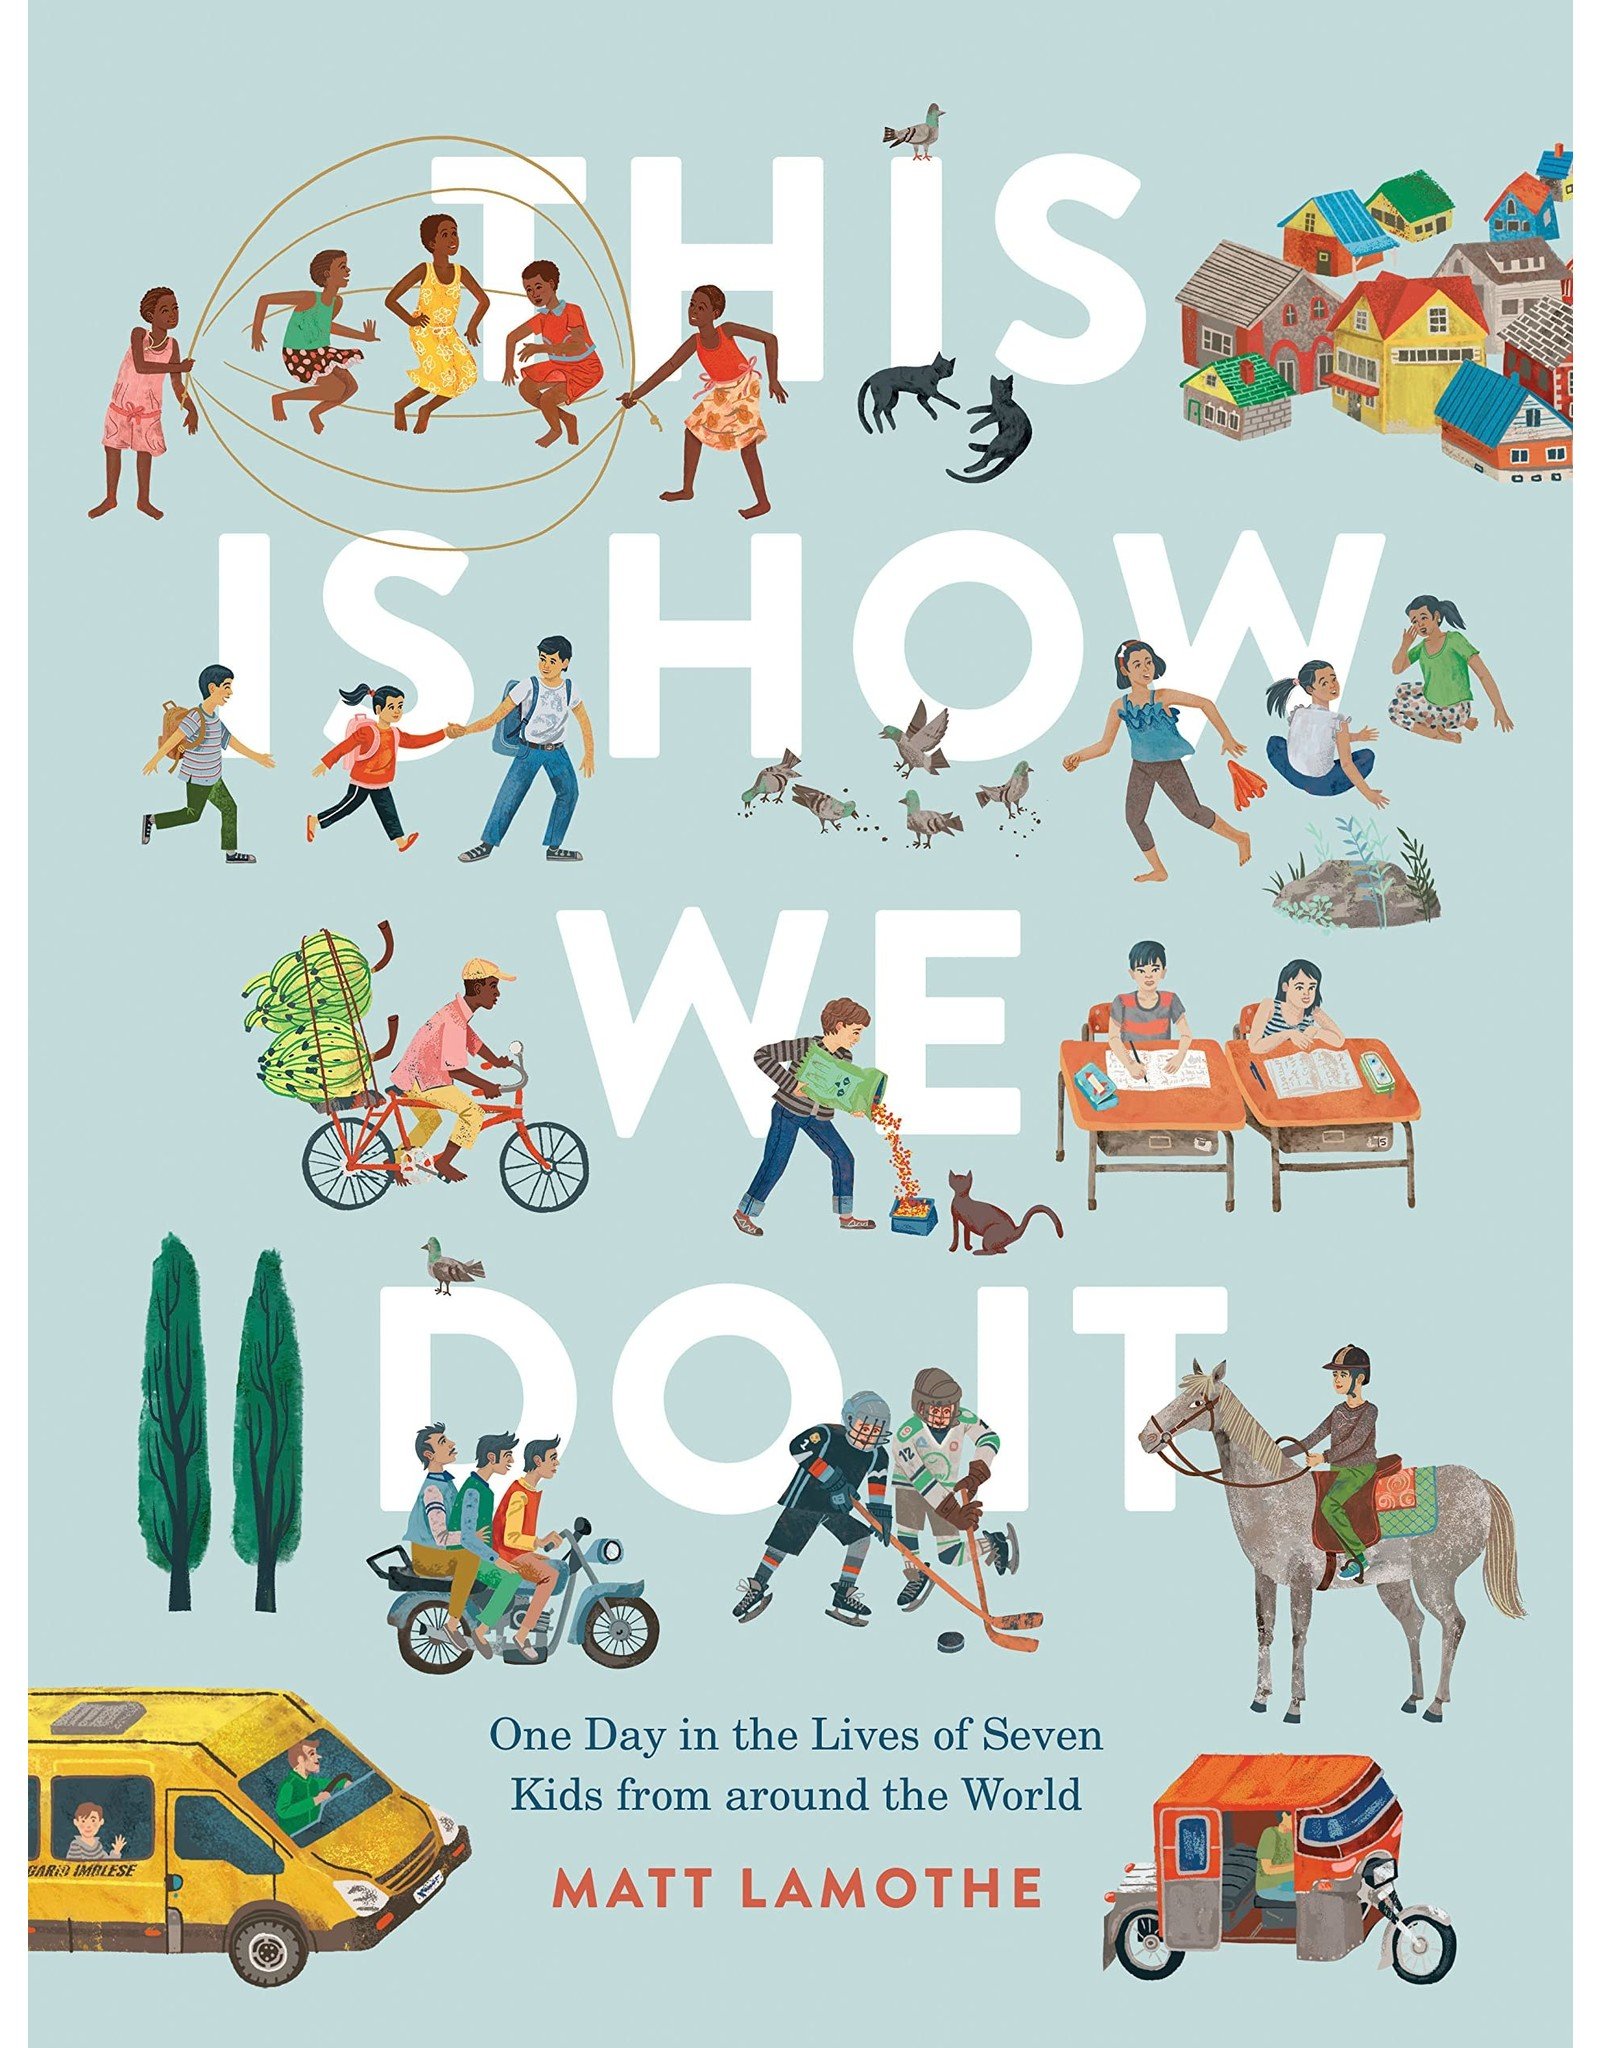 Literature This Is How We Do It: One Day in the Lives of Seven Kids from around the World